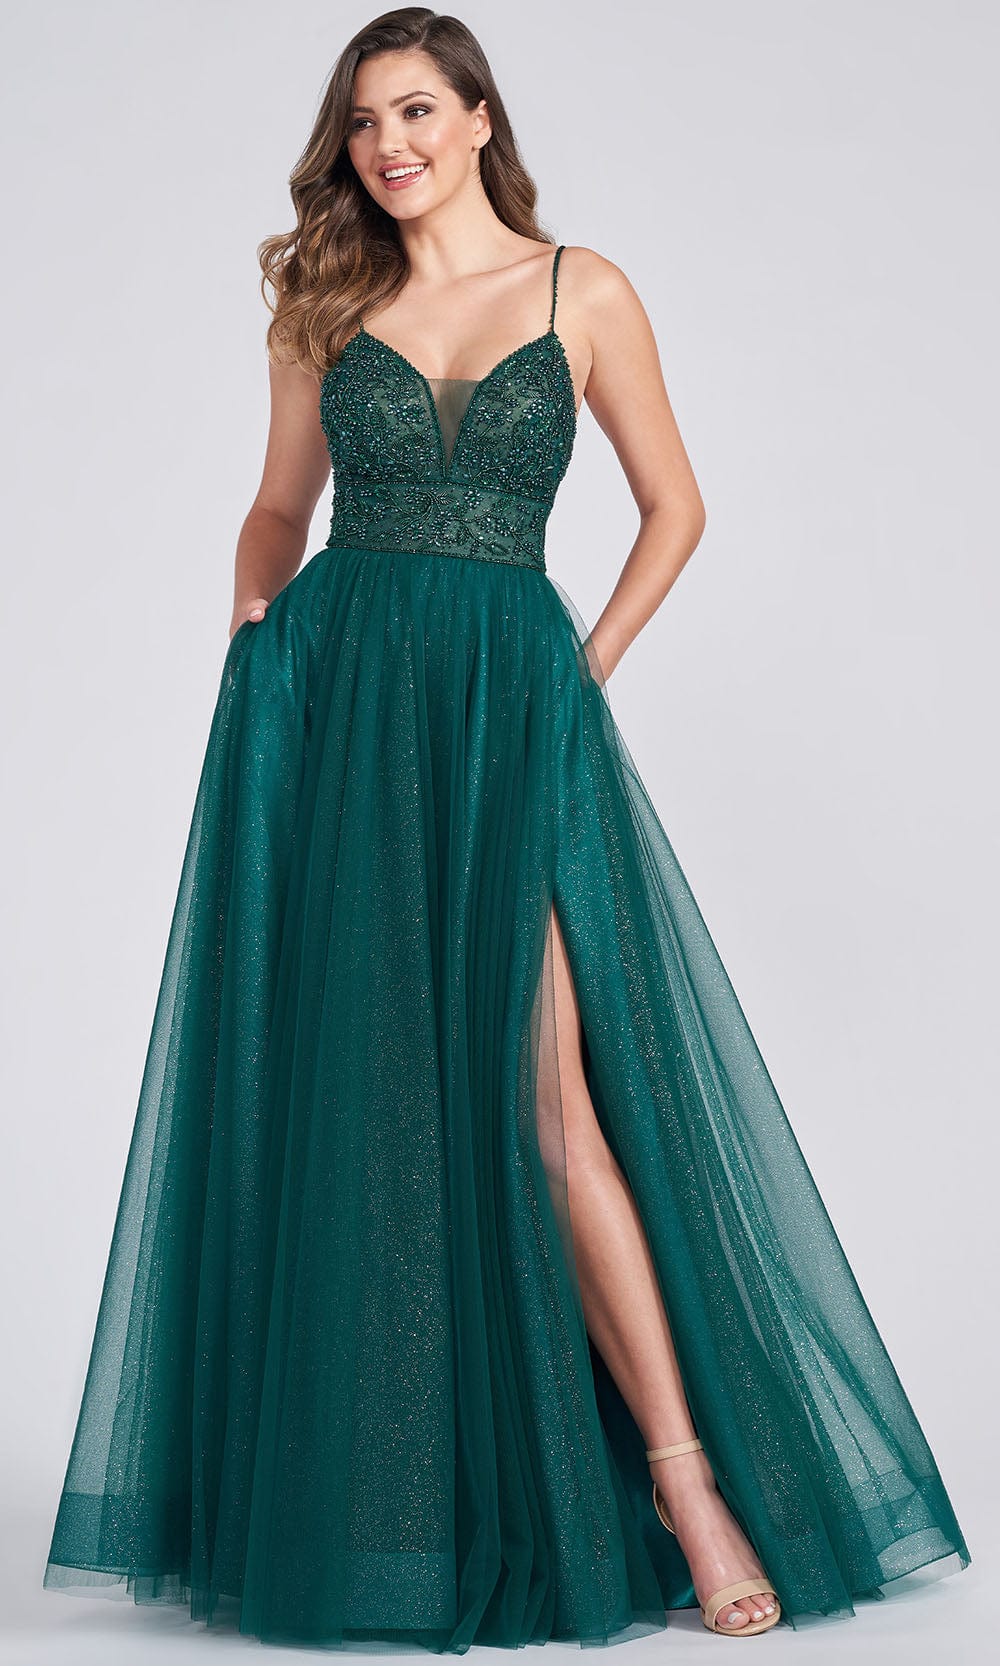 Ellie Wilde EW122066 - Lace Up Back Adorned Bodice A Line Gown Prom Dresses 00 / Emerald